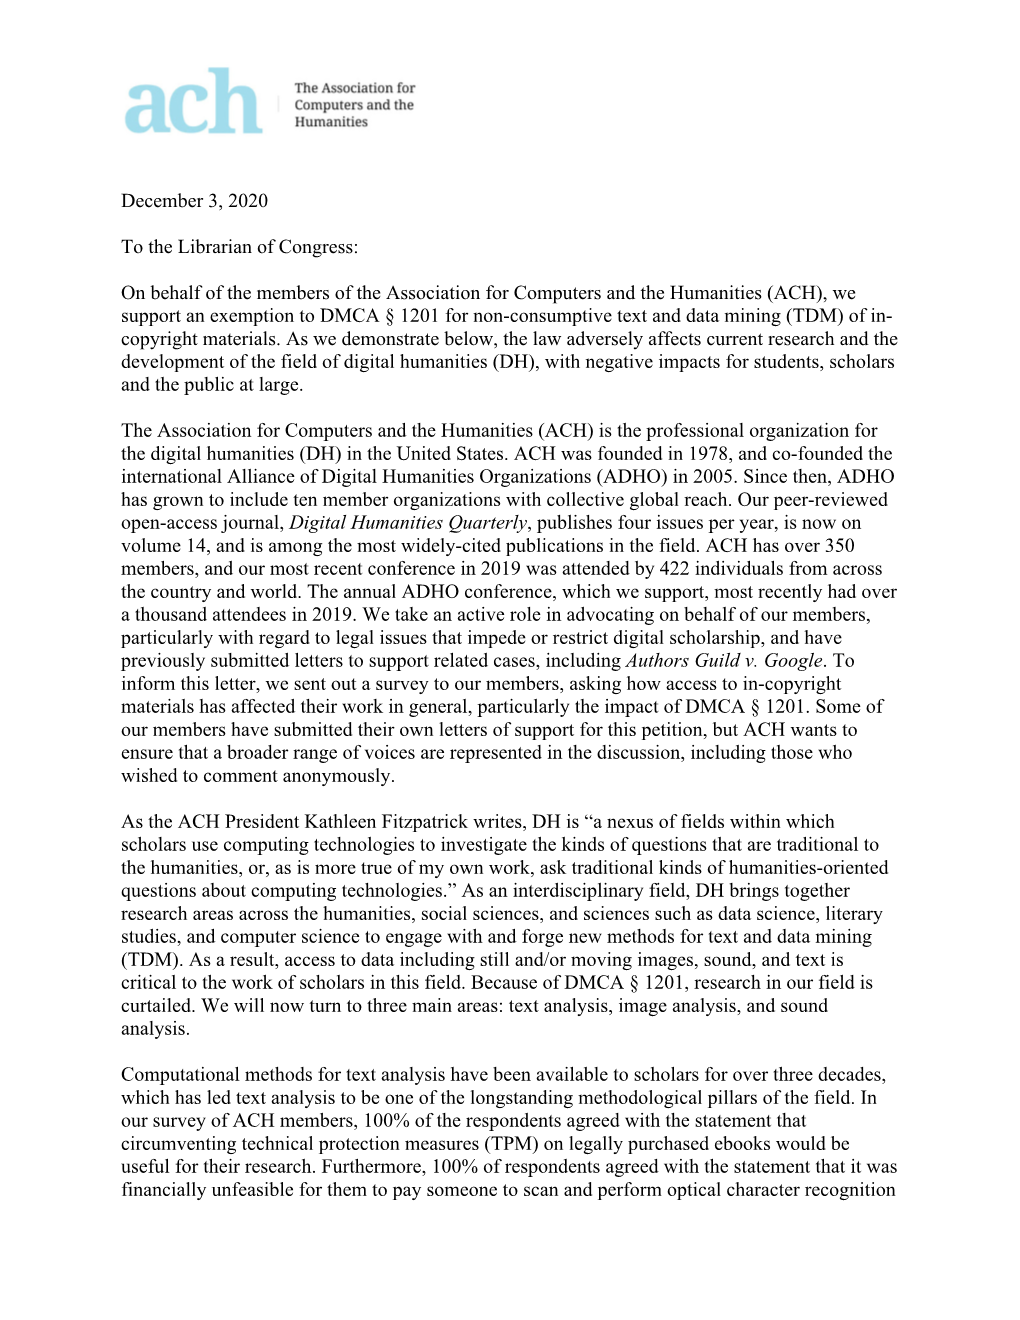 Letters in Support of Proposed Exemption for TDM Research